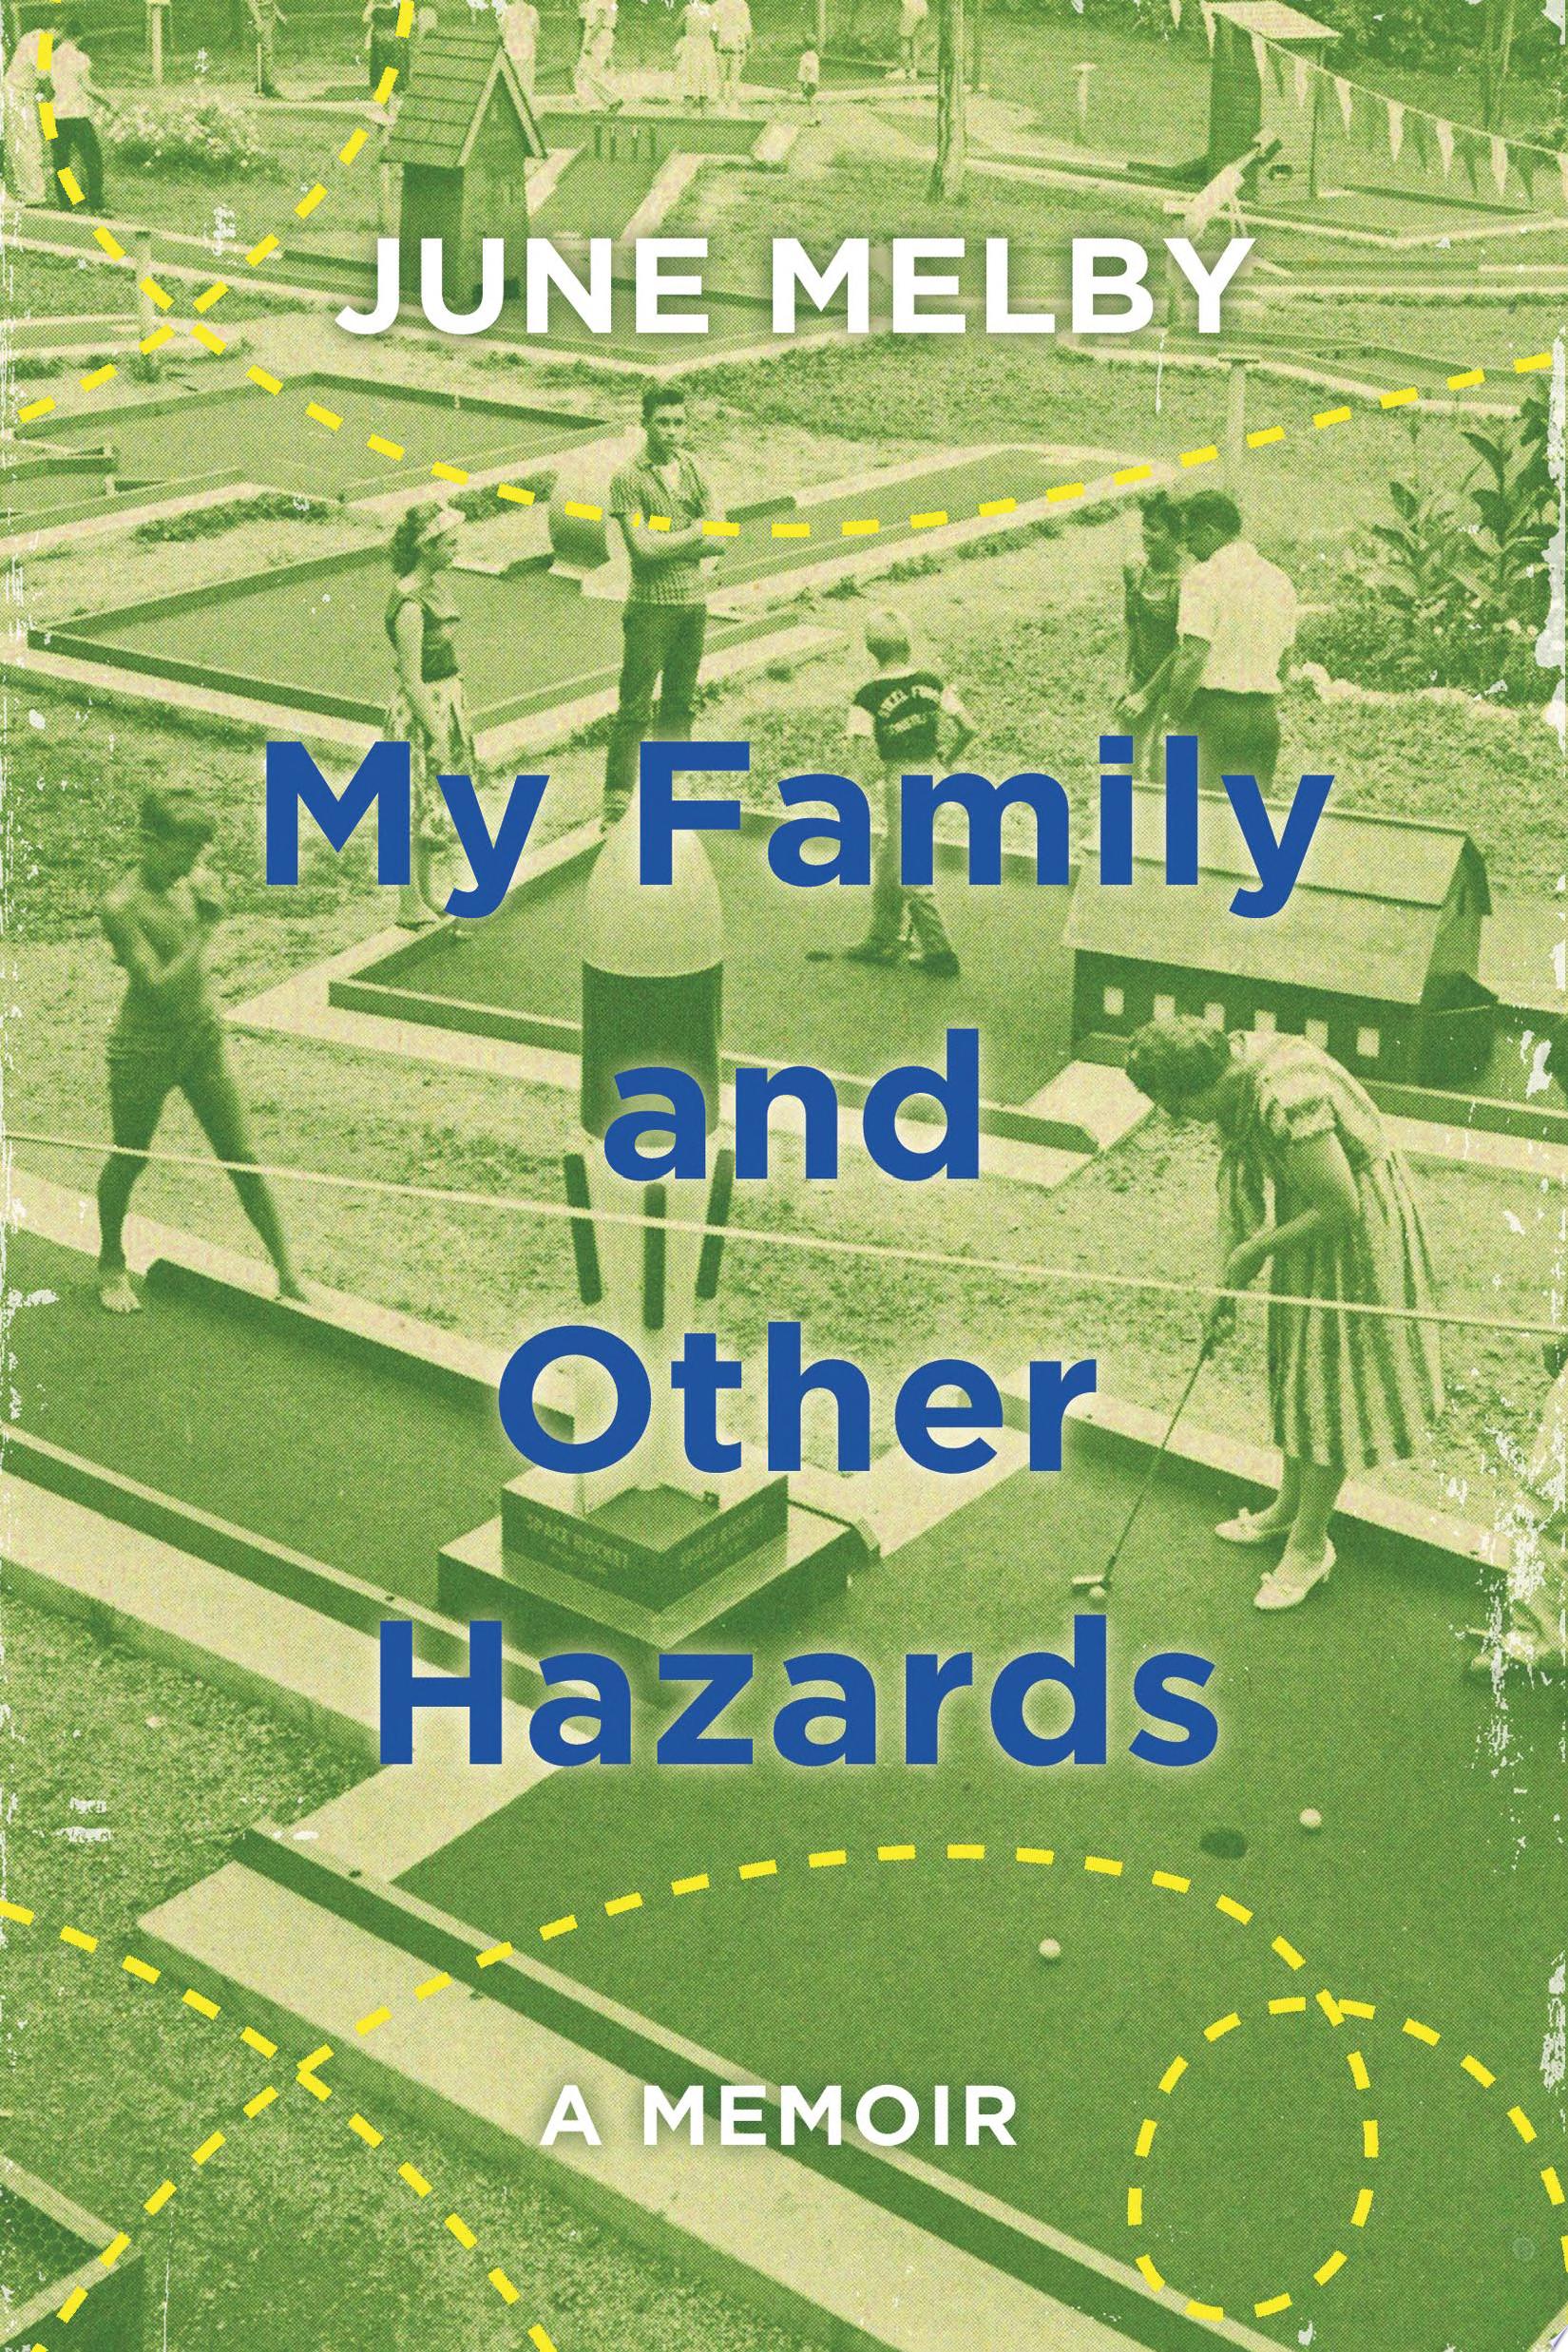 Image for "My Family and Other Hazards"